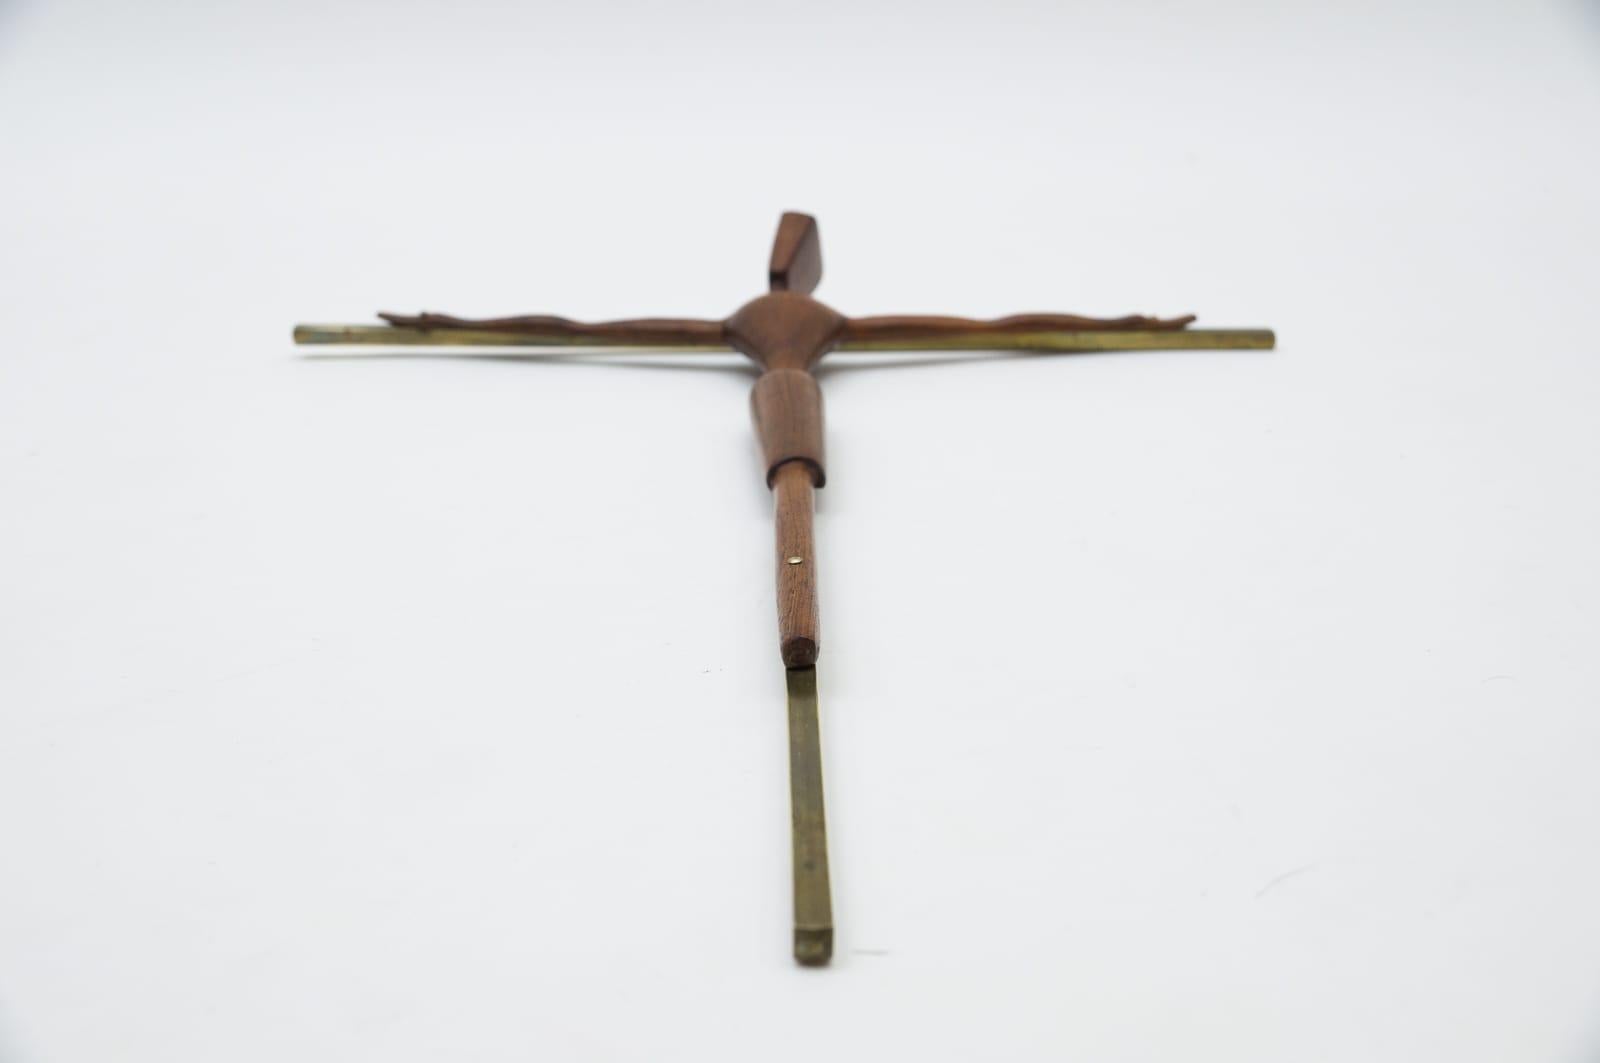 Mid-Century Modern brass crucifix with an hand carved teak Jesus sculpture, 1950s

Super elegant, very puristic and imposing

Switzerland.